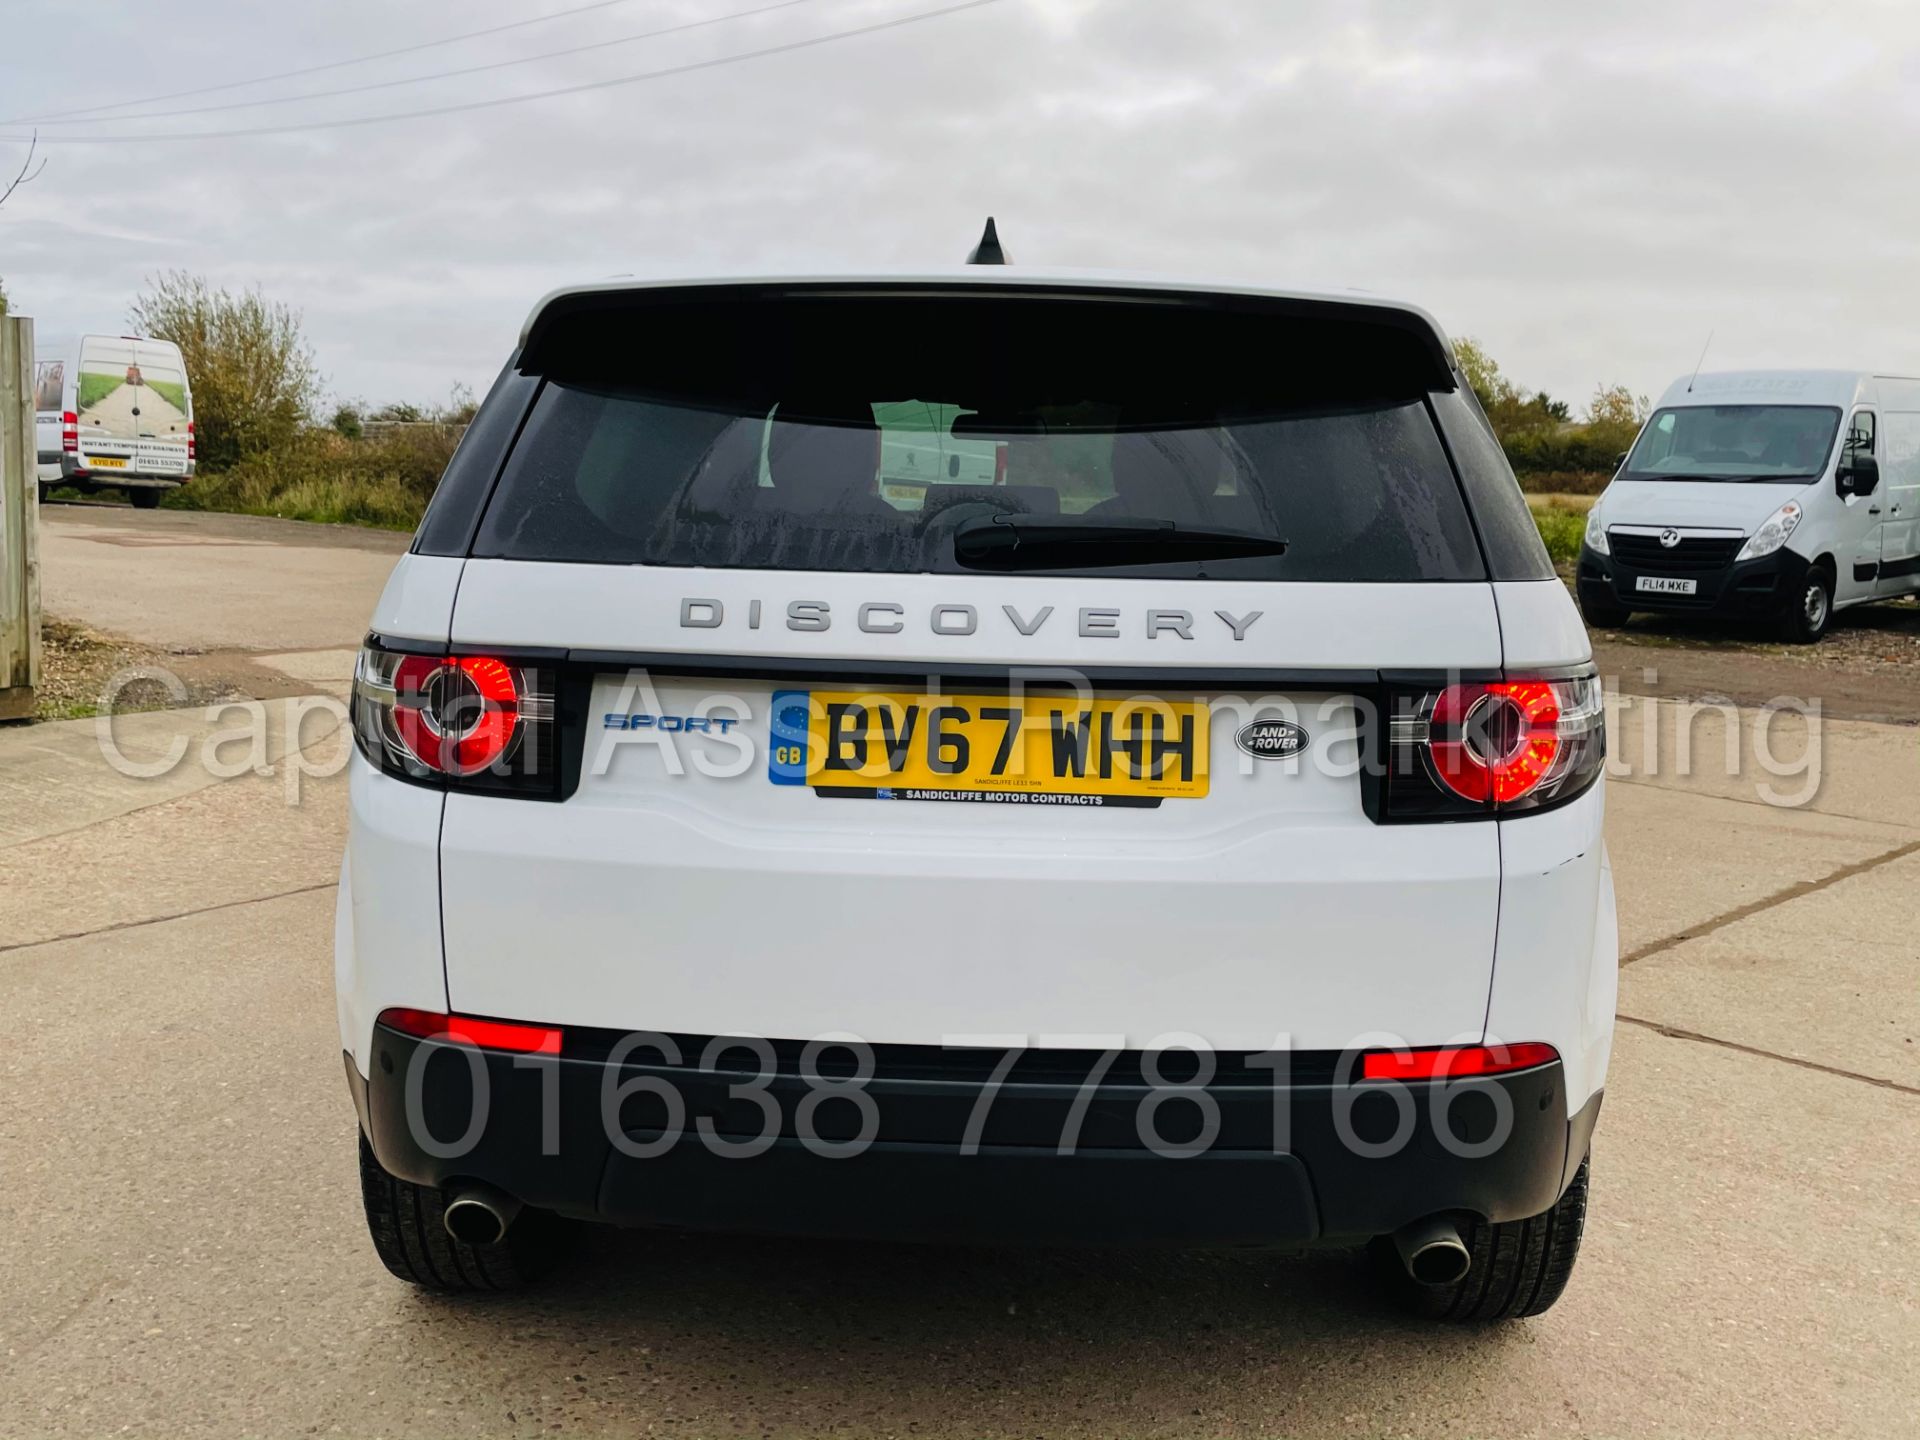 LAND ROVER DISCOVERY SPORT *SPECIAL EDITION* SUV (2018) '2.0 TD4 - STOP/START' (1 OWNER FROM NEW) - Image 11 of 48